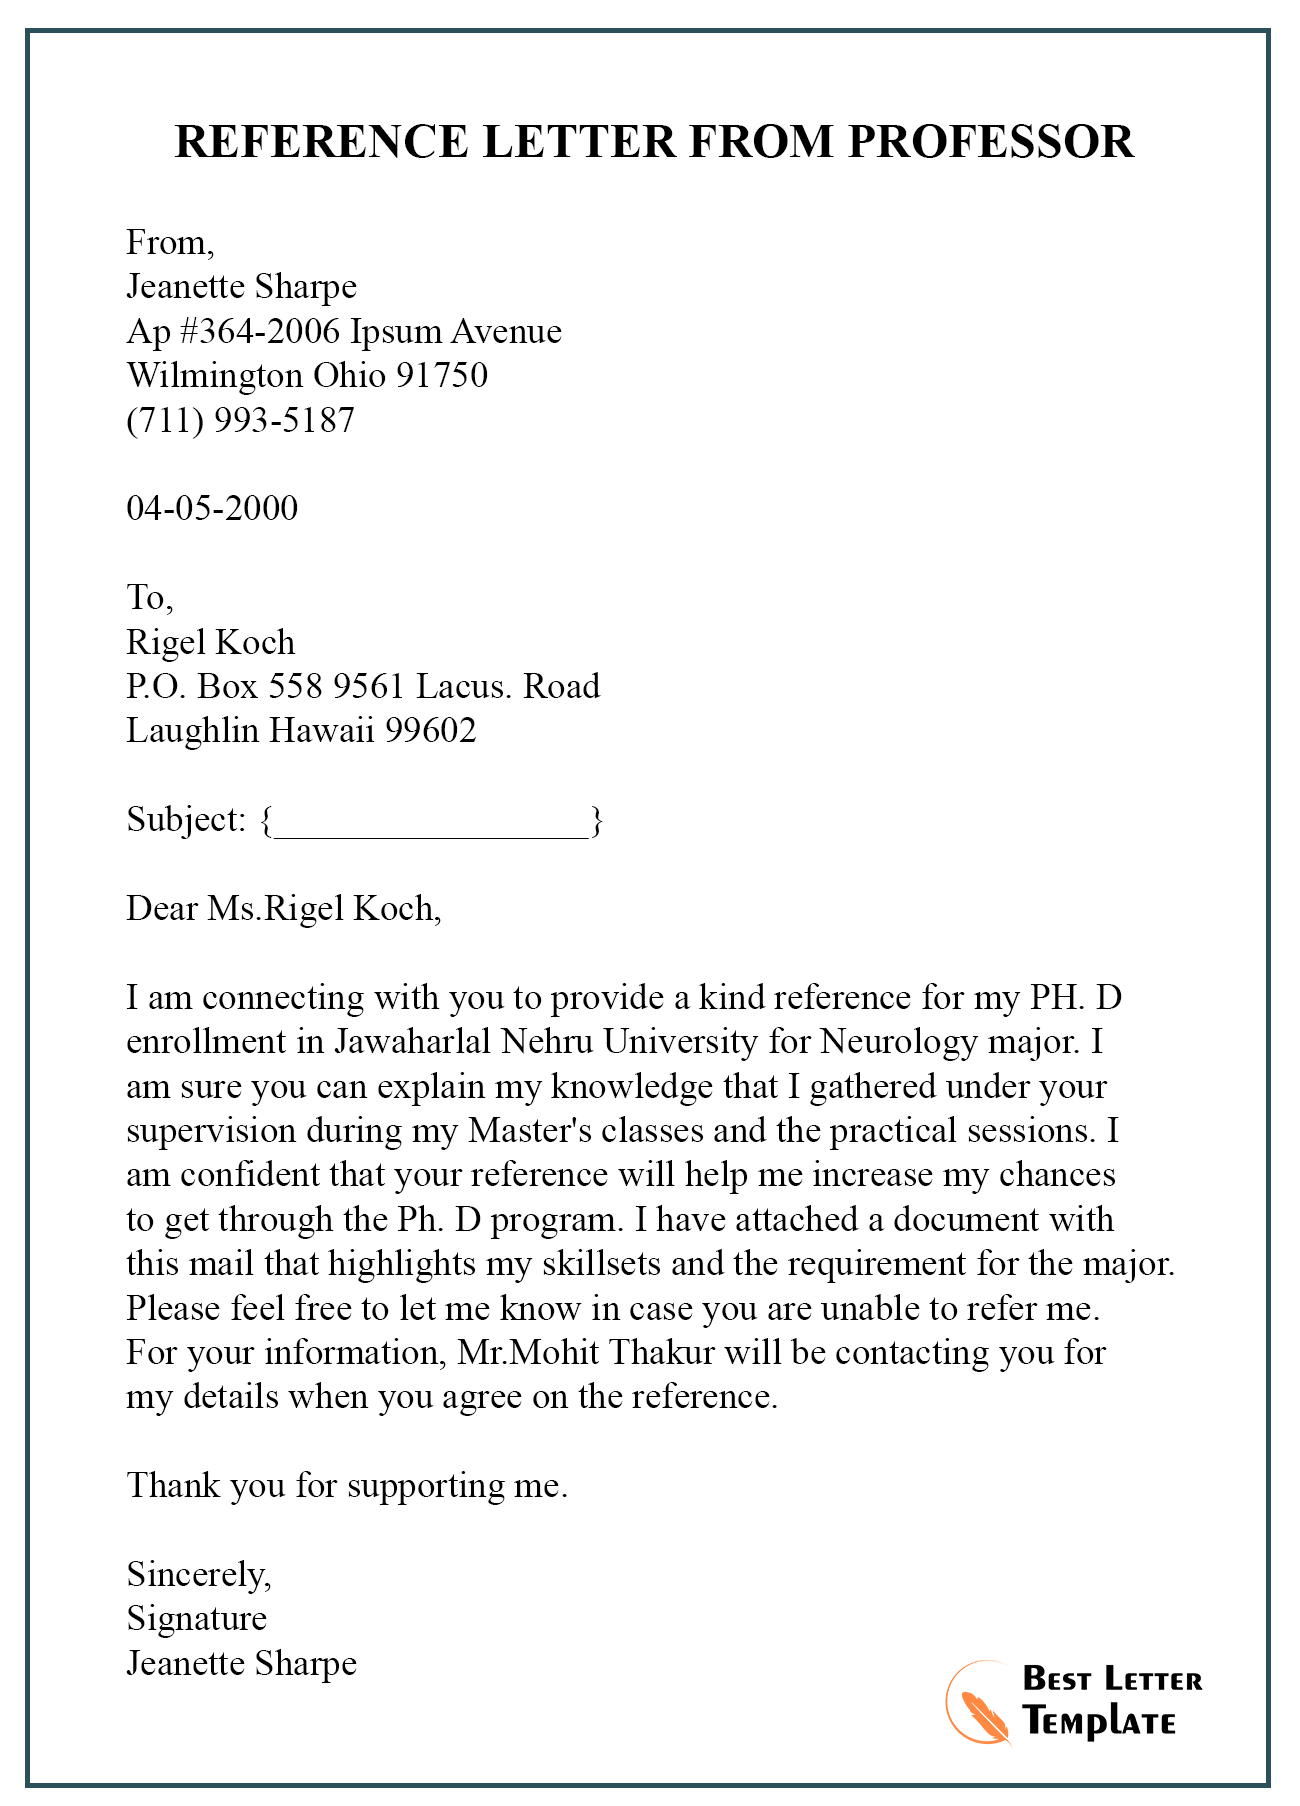 Request For Reference Letter From Professor Sample Debandje for dimensions 1300 X 1806